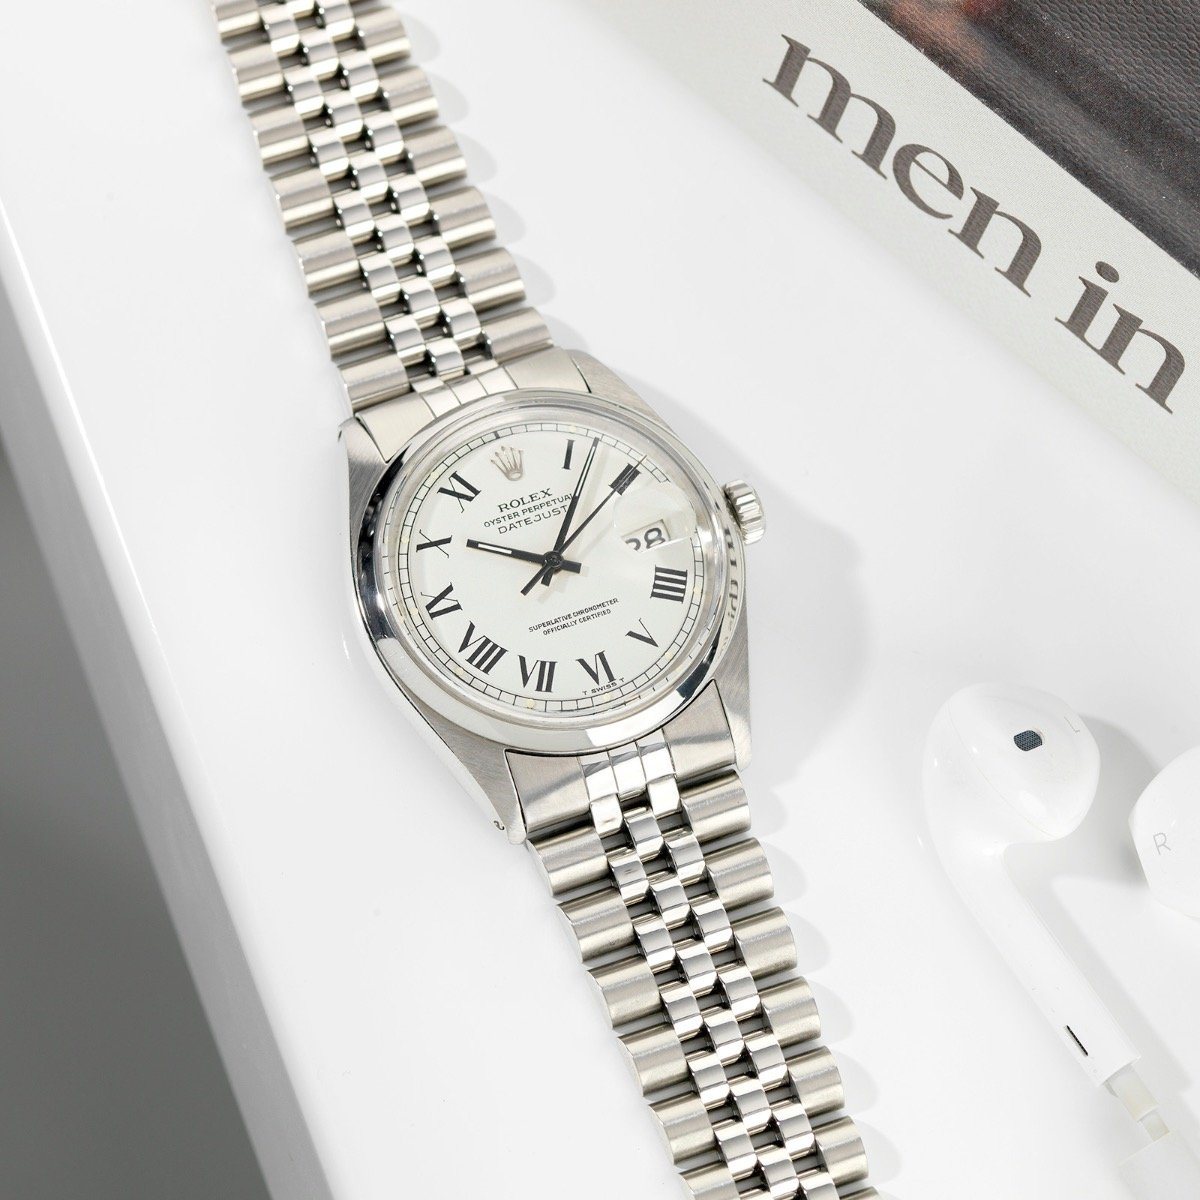 Rolex Datejust Reference 1600 Buckley Dial